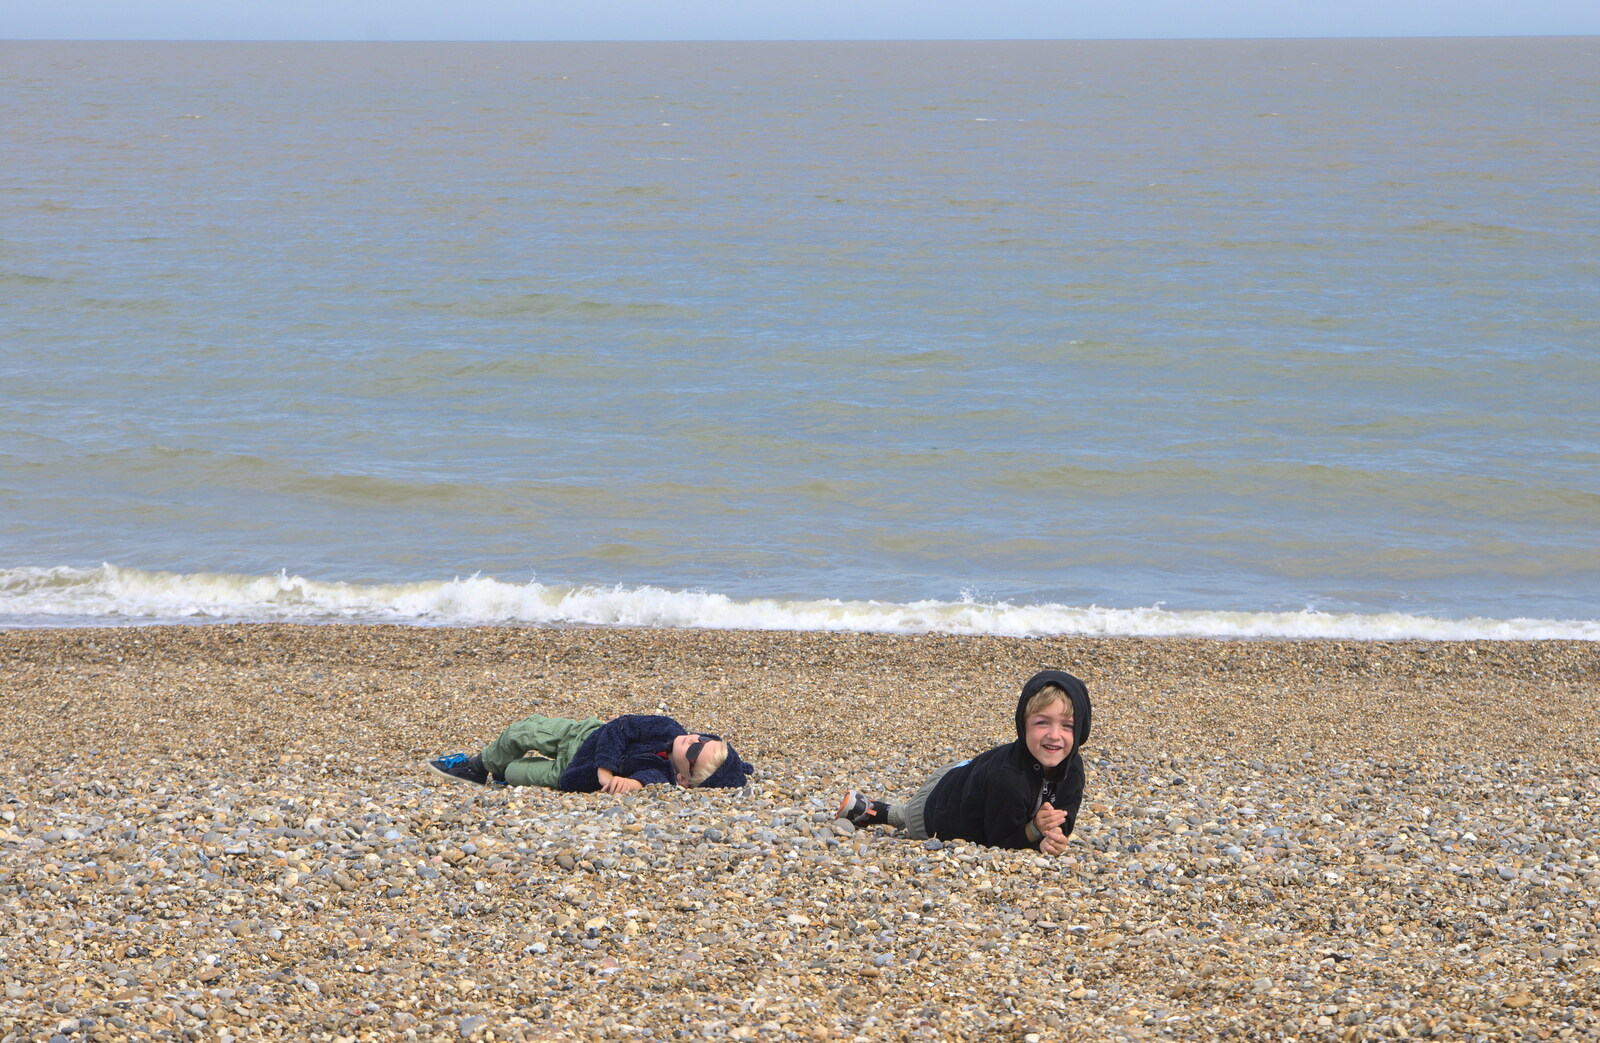 The boys on the beach from The Archaeology of Dunwich: A Camping Trip, Dunwich, Suffolk - 1st August 2015